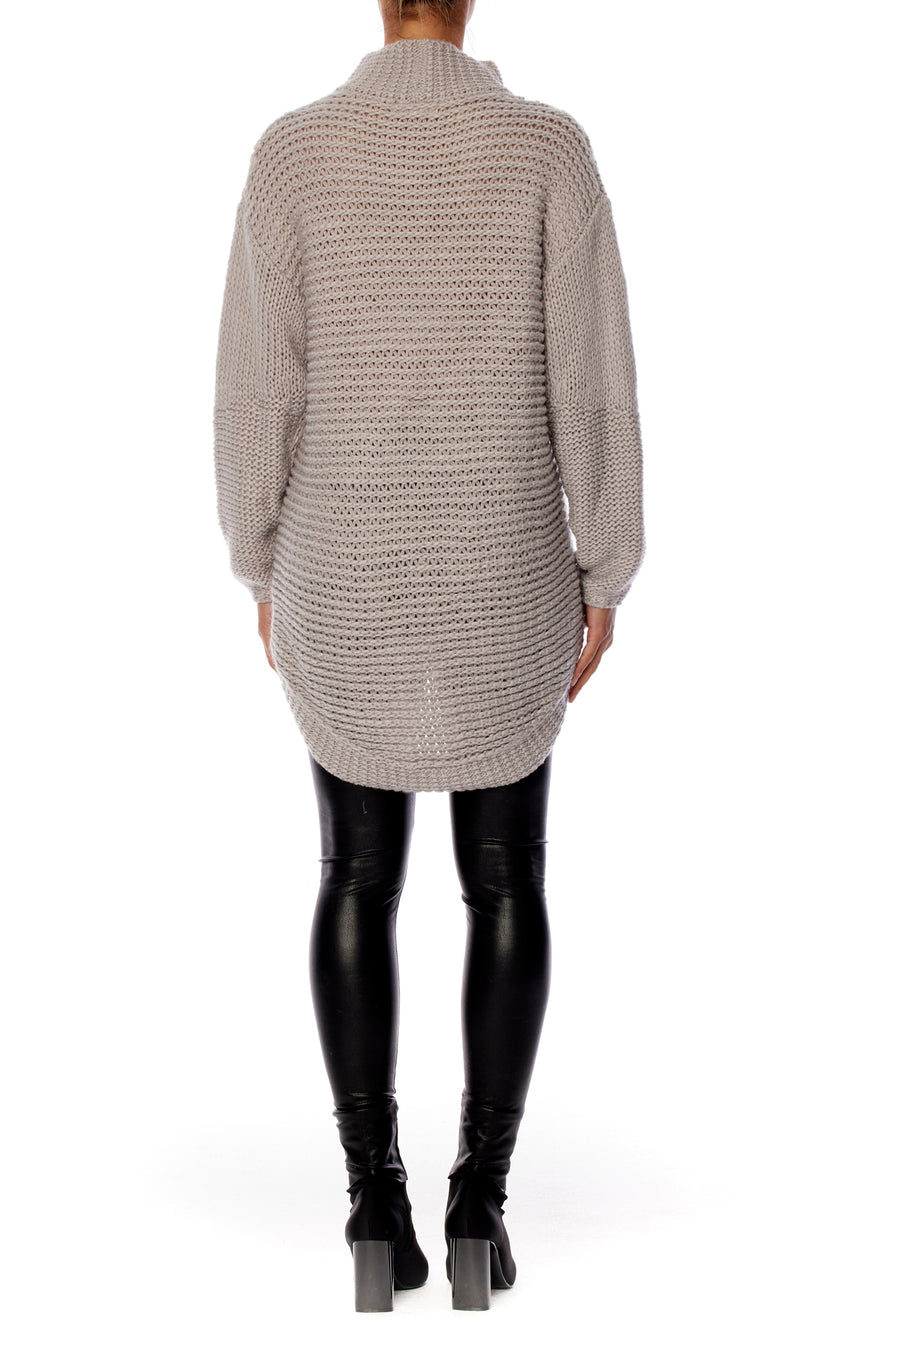 mock neck sweater with long sleeves, high-low hem and multi-knit design detailing in dove grey